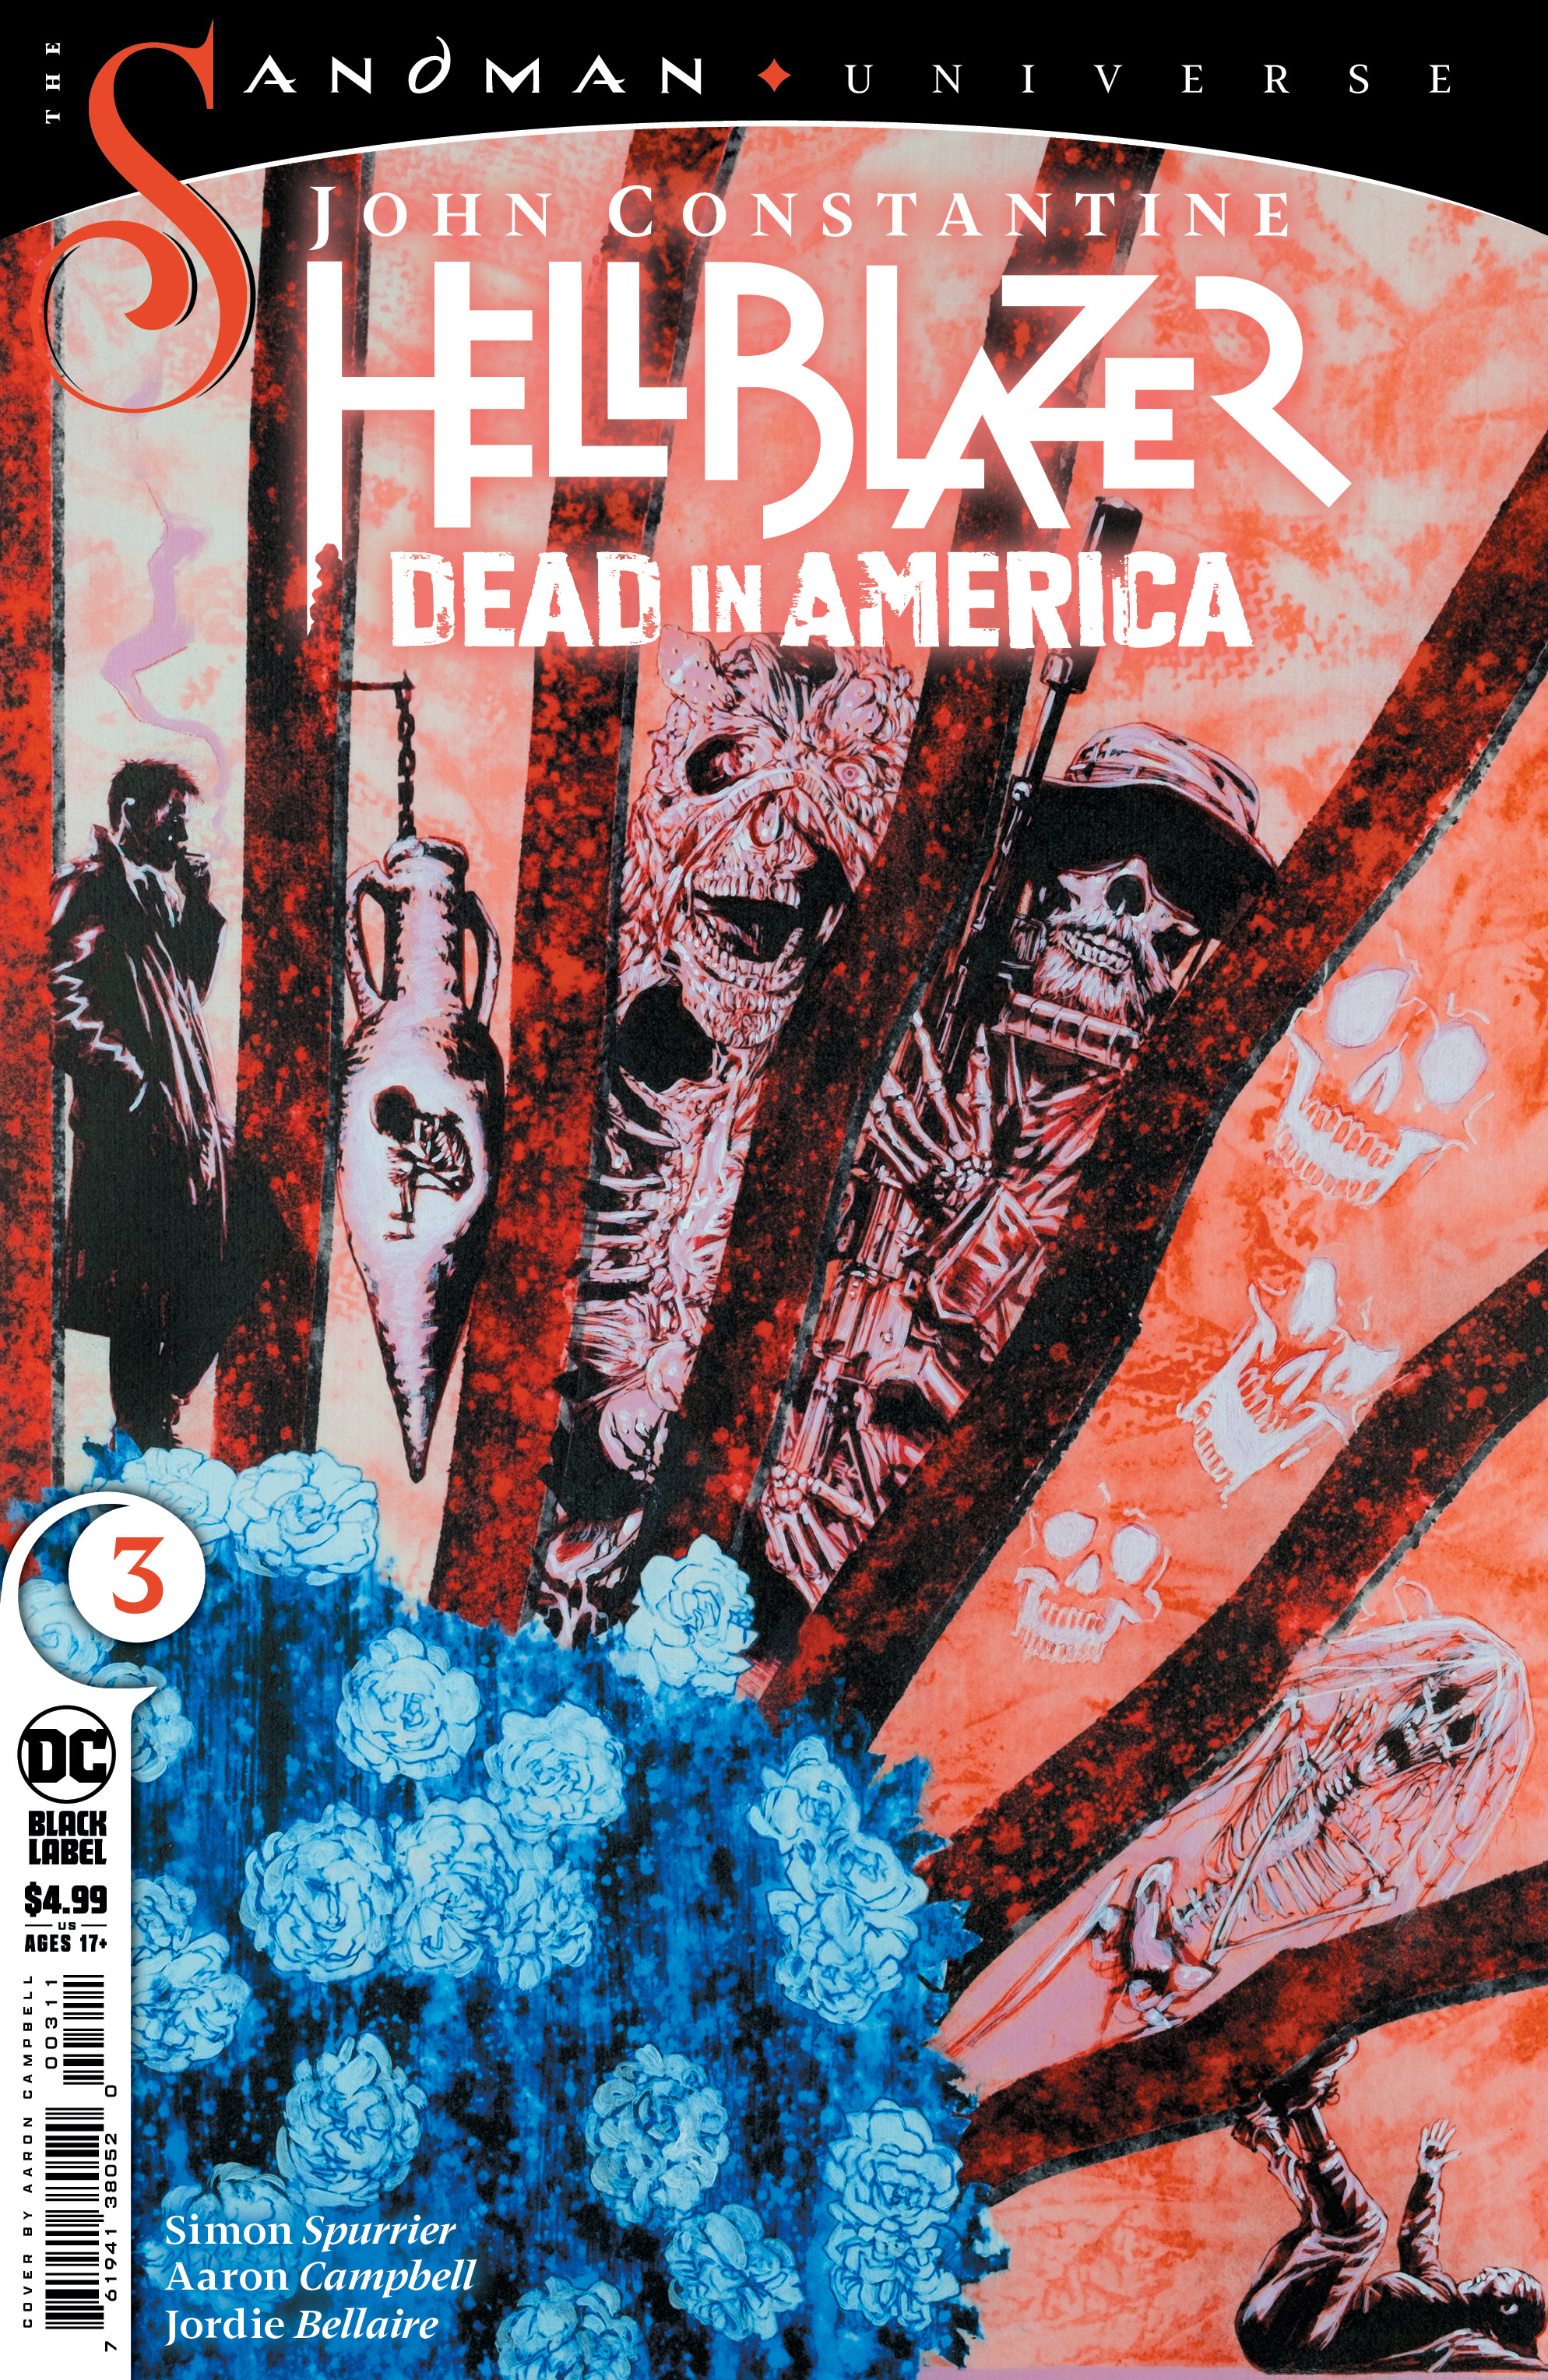 John Constantine, Hellblazer Dead in America #3 Cover A Aaron Campbell (Mature) (Of 9)